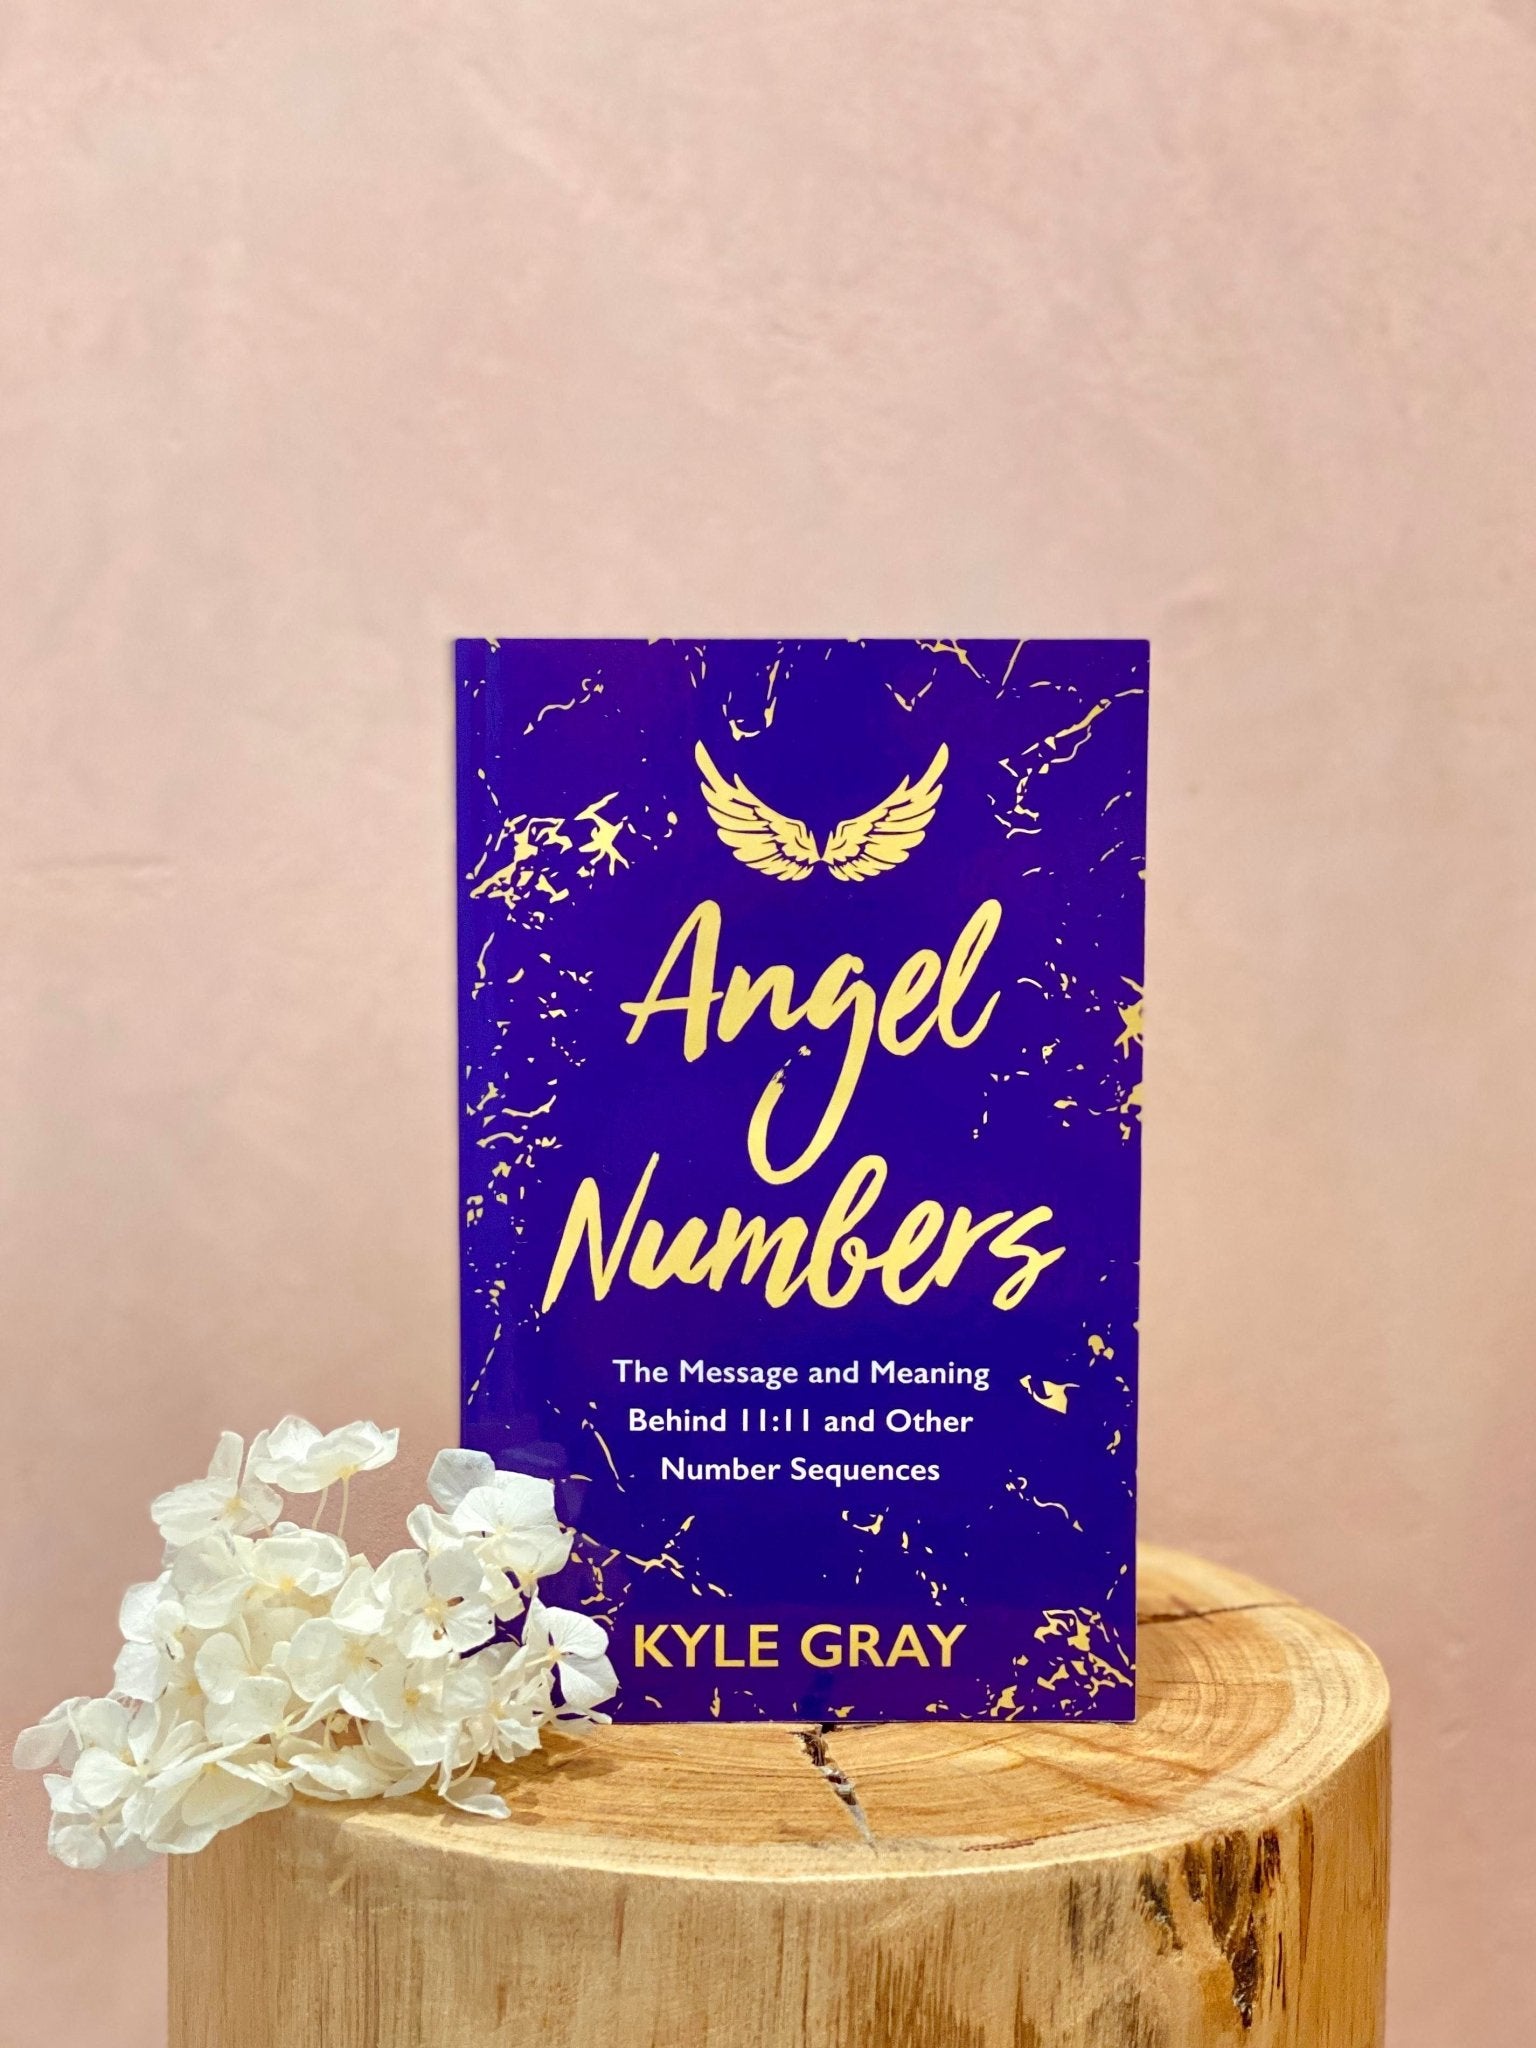 Angel Numbers - The Wong Way